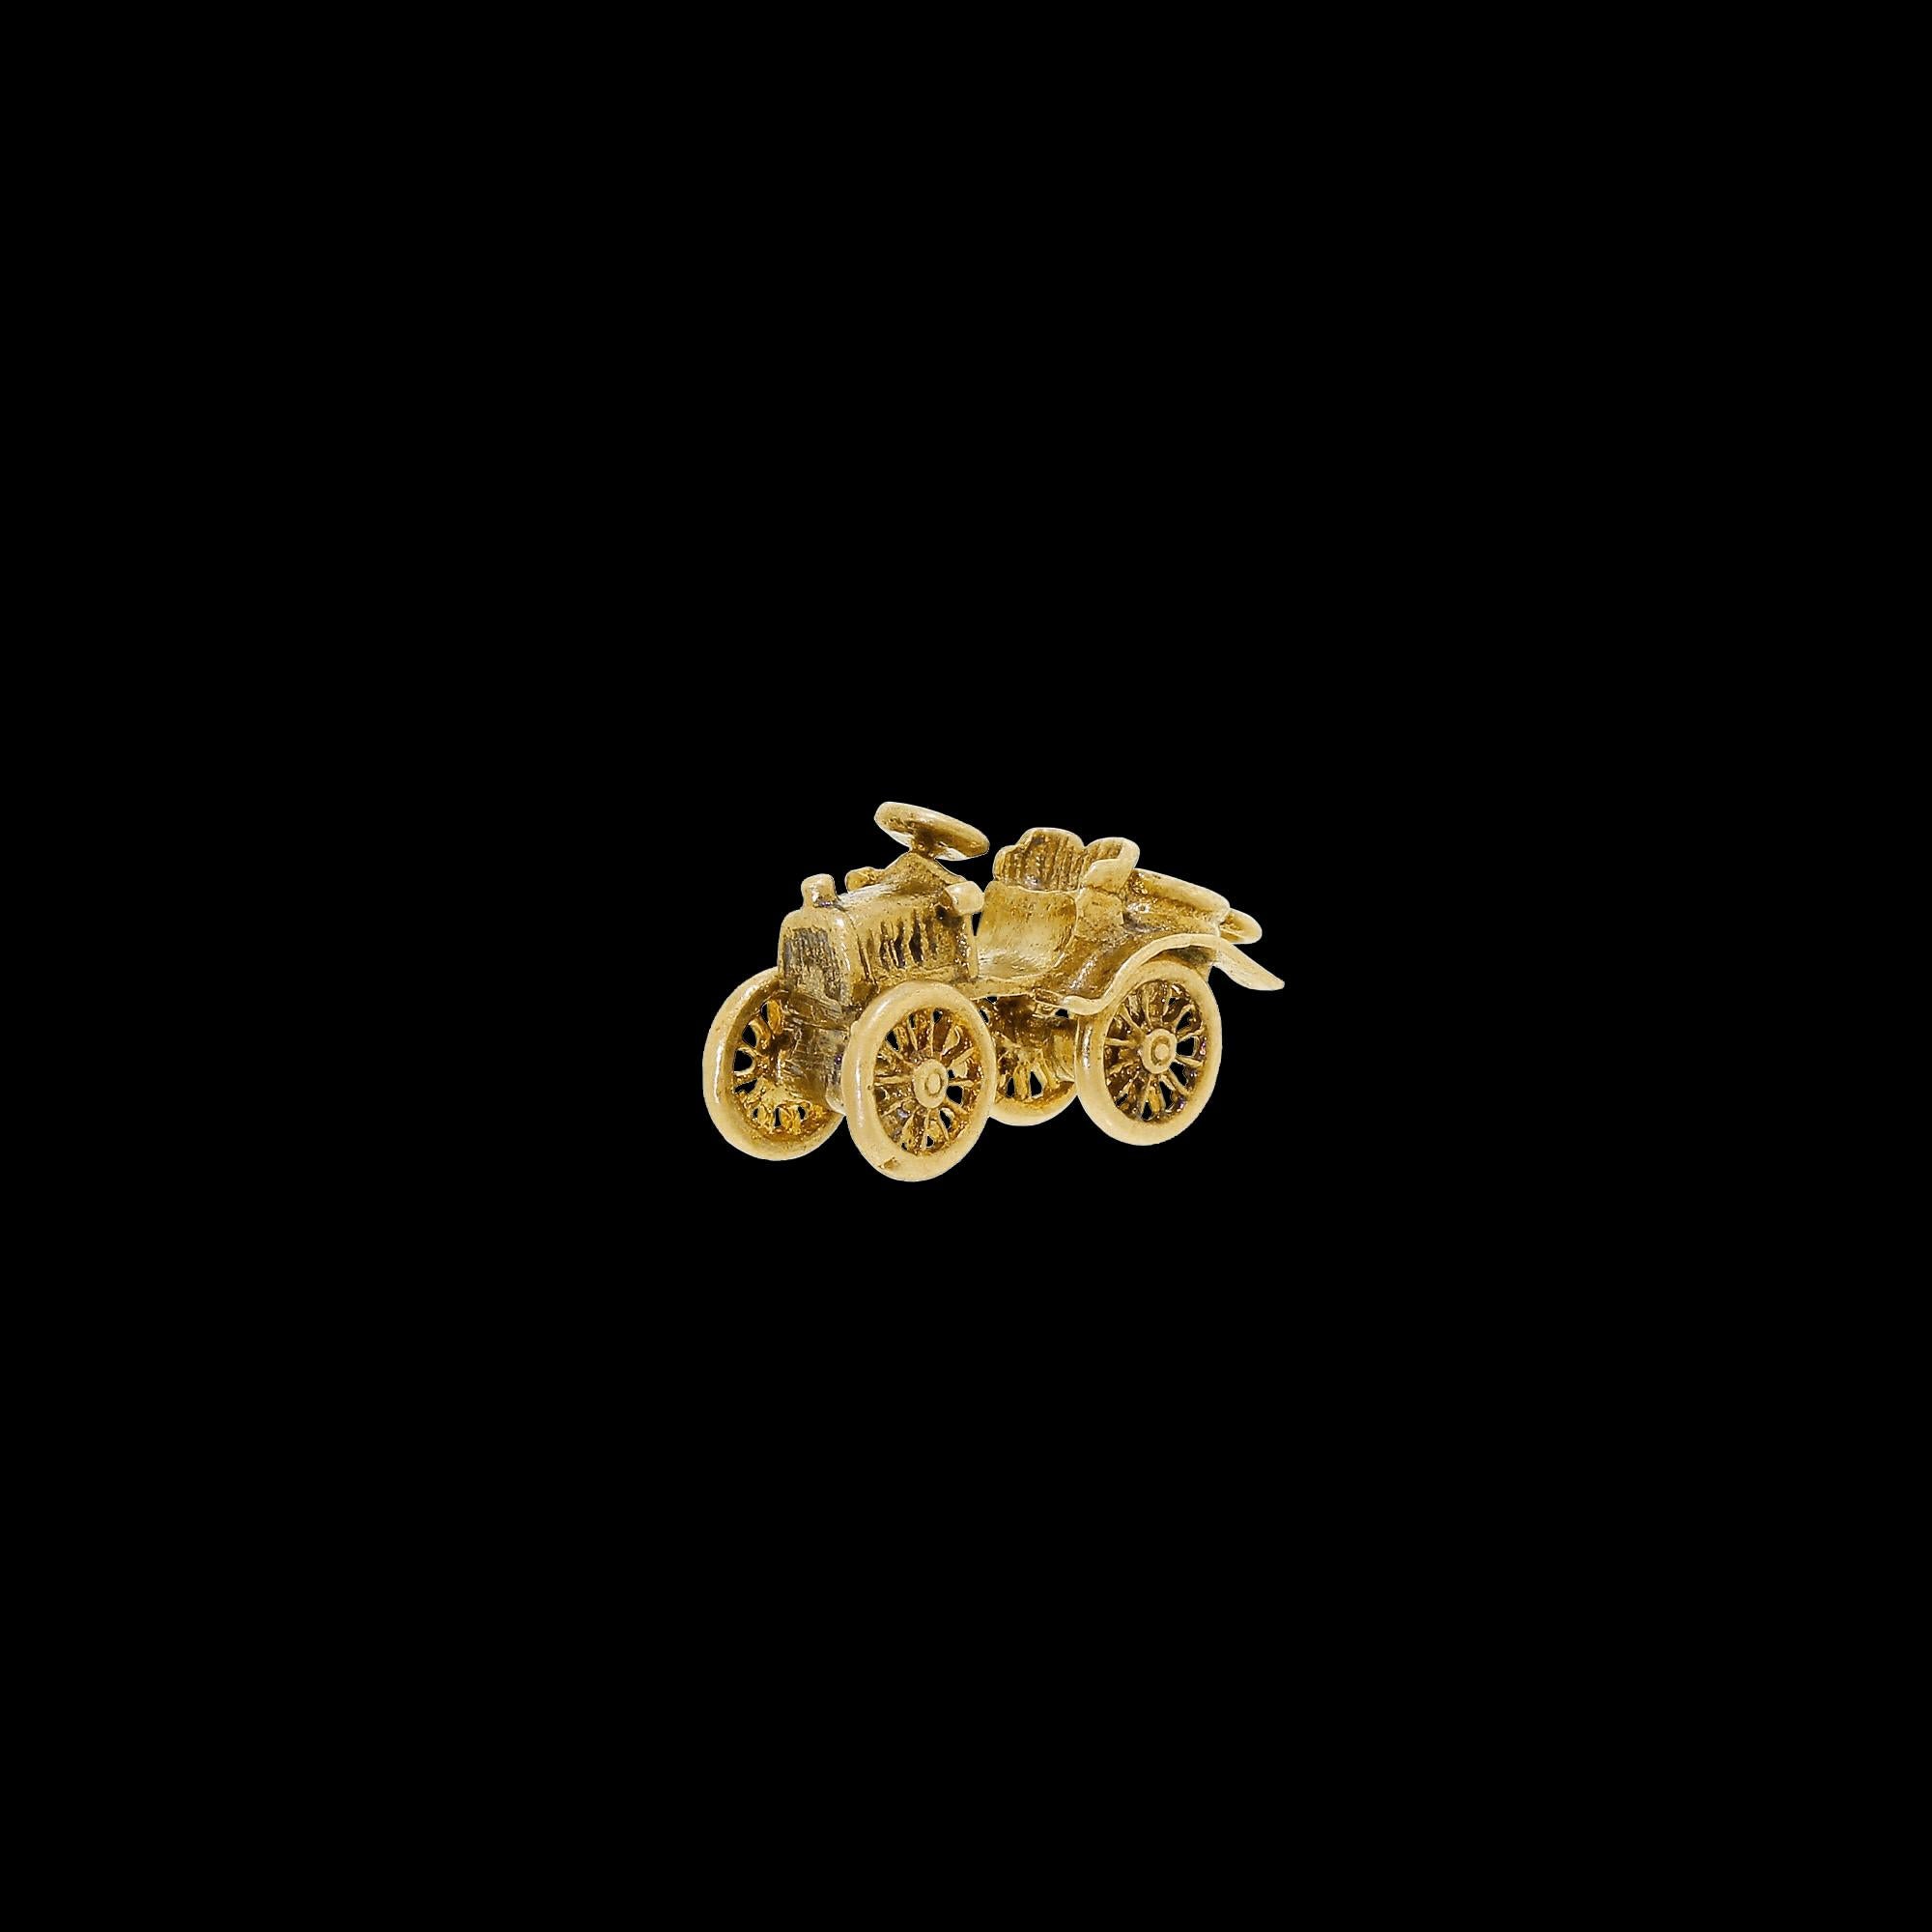 Details and Condition: This fabulous 9K solid yellow gold charm features an antique car with spinning front wheels and exquisite details. The wheels and steering wheel are particularly well crafted, with tiny individual spokes visible upon